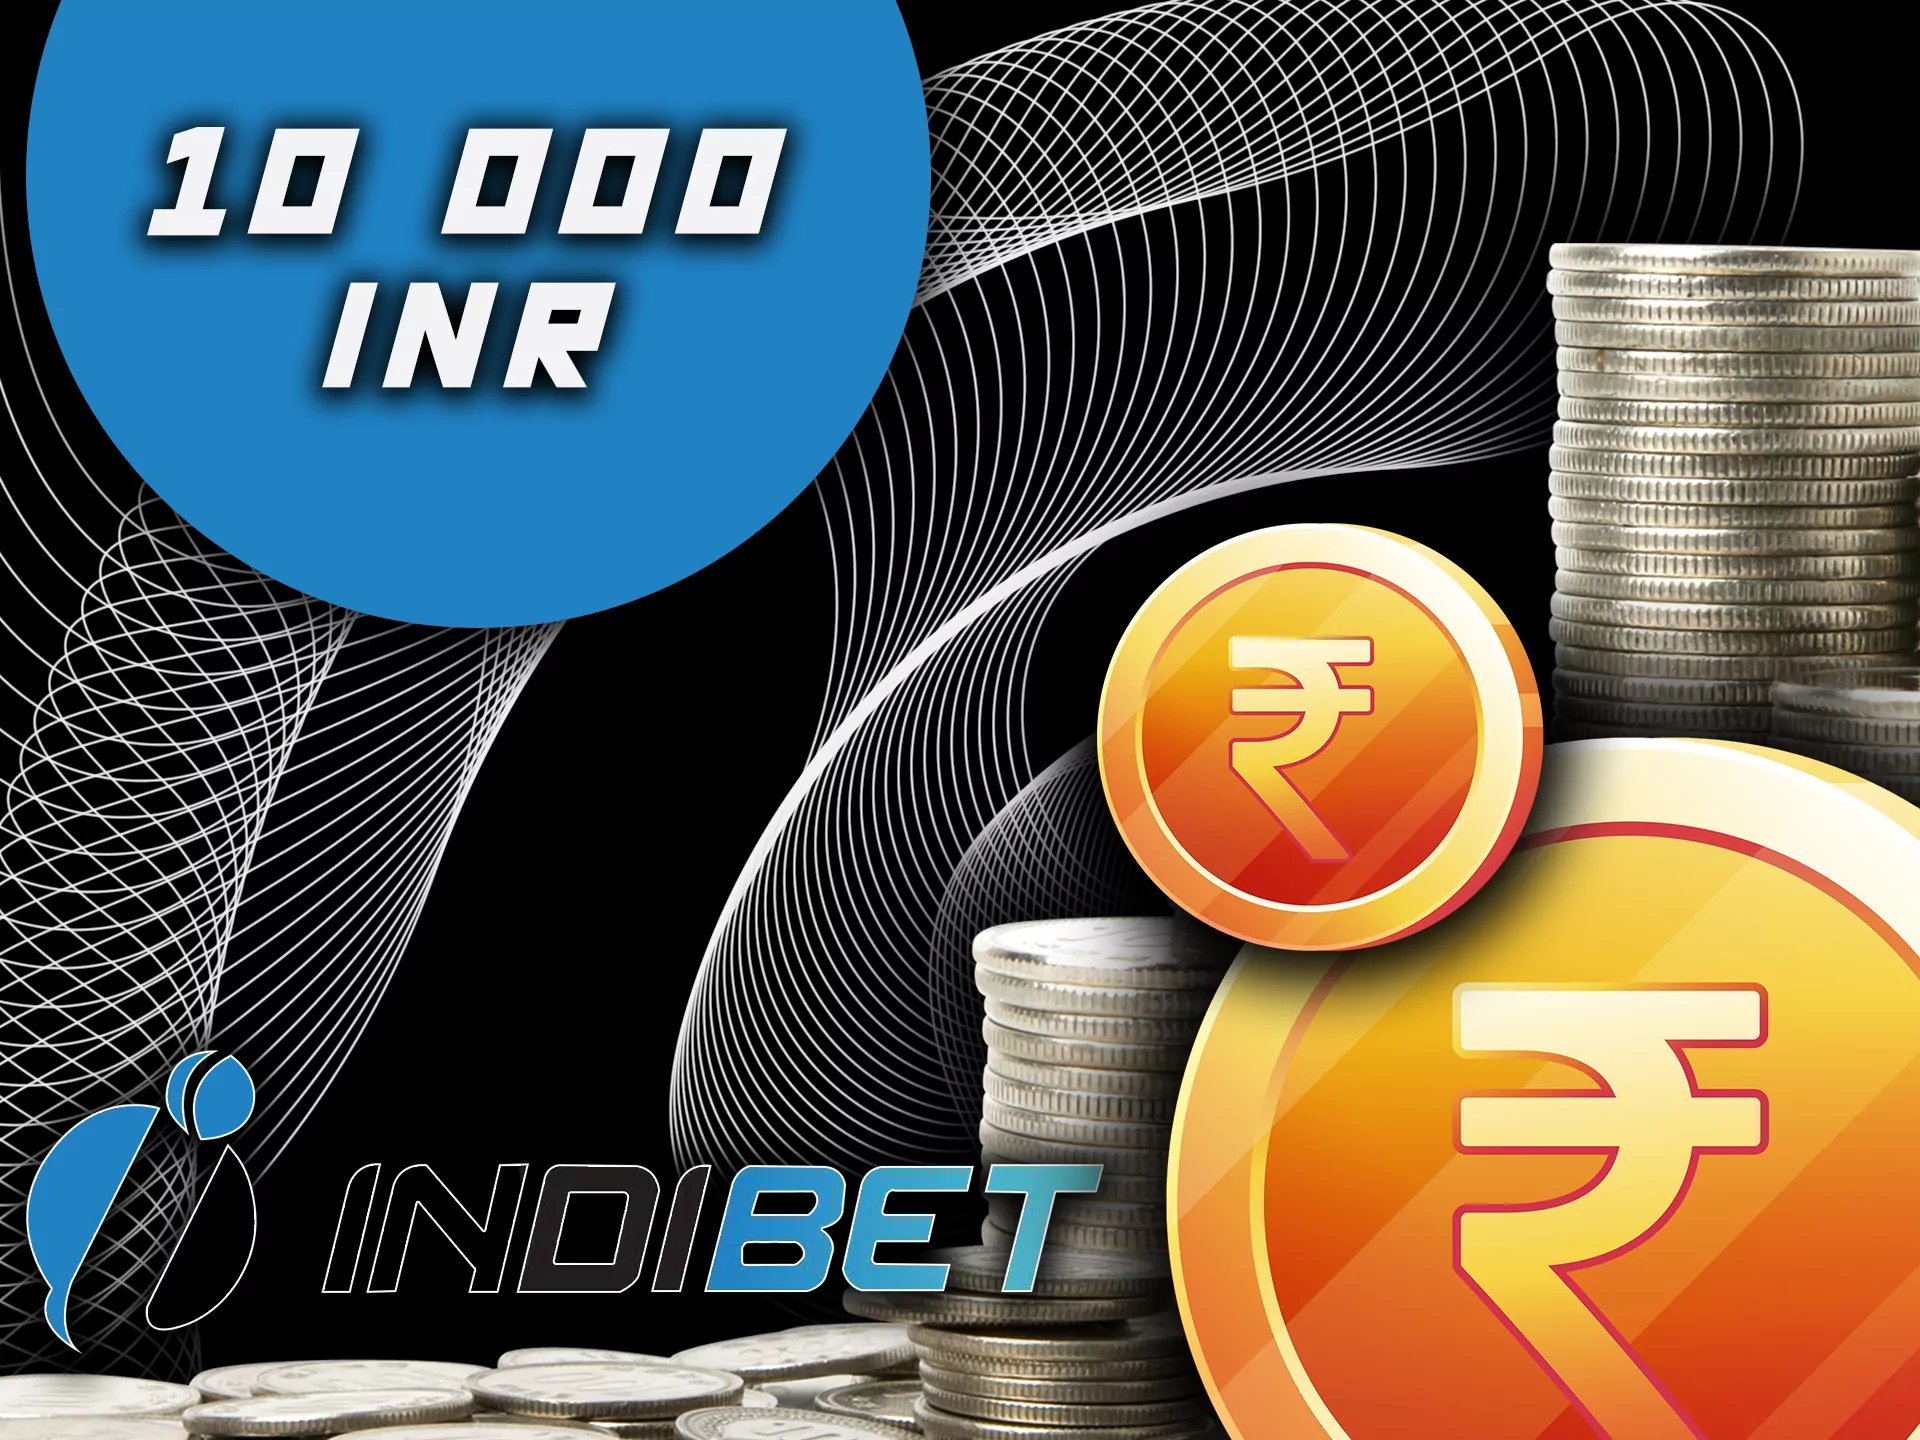 After wagering the bonus you can get up to 10,000 Rupees.